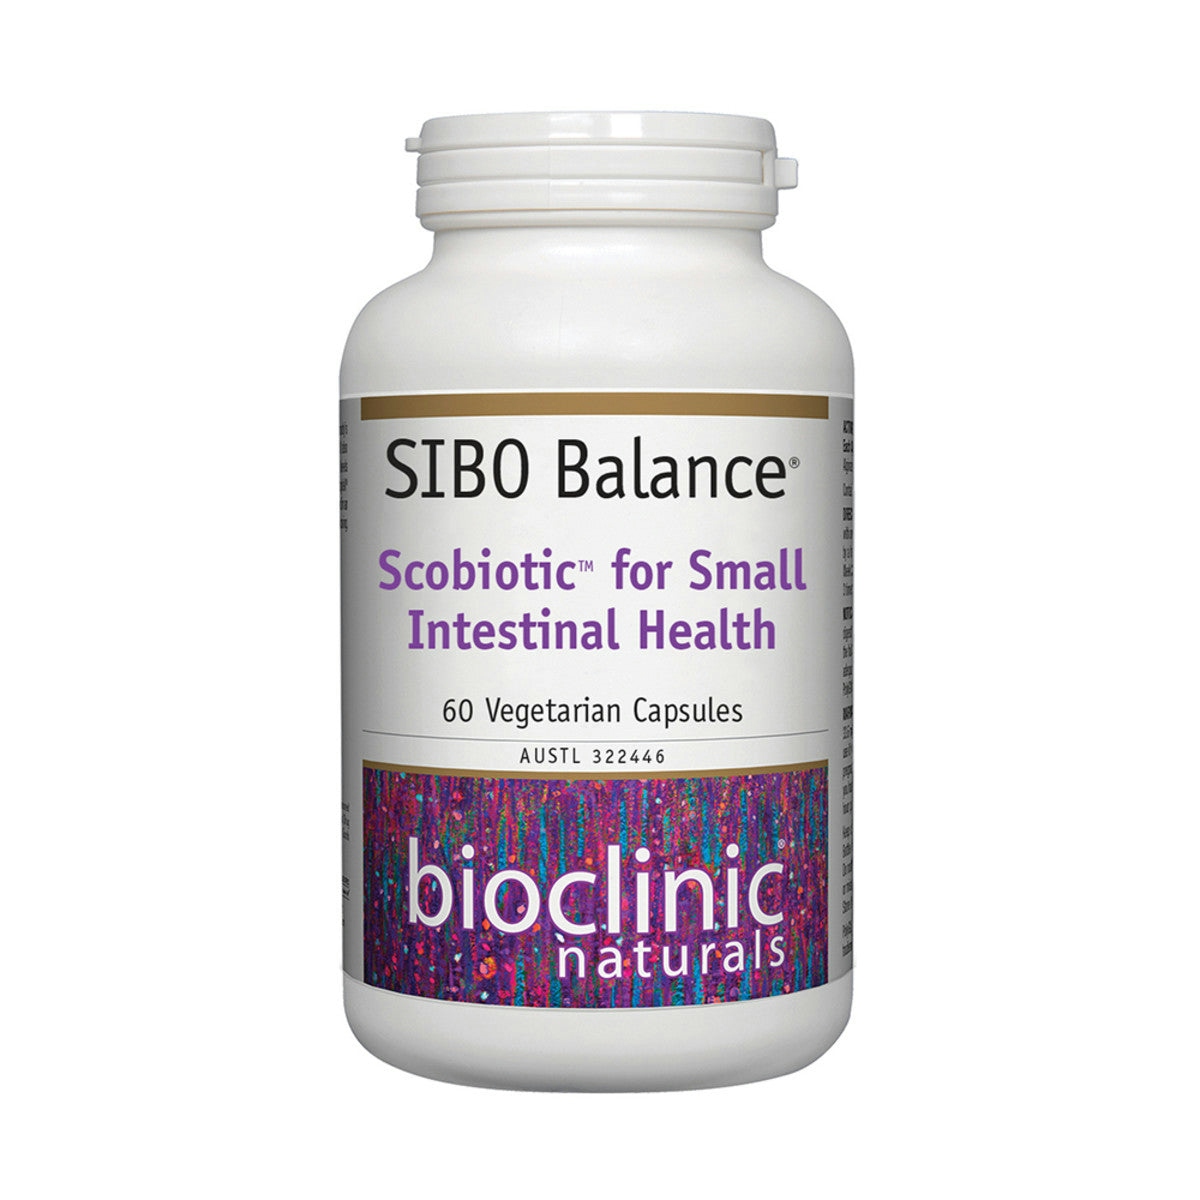 Image of Bioclinic Naturals Sibo balance 60vc with a white background